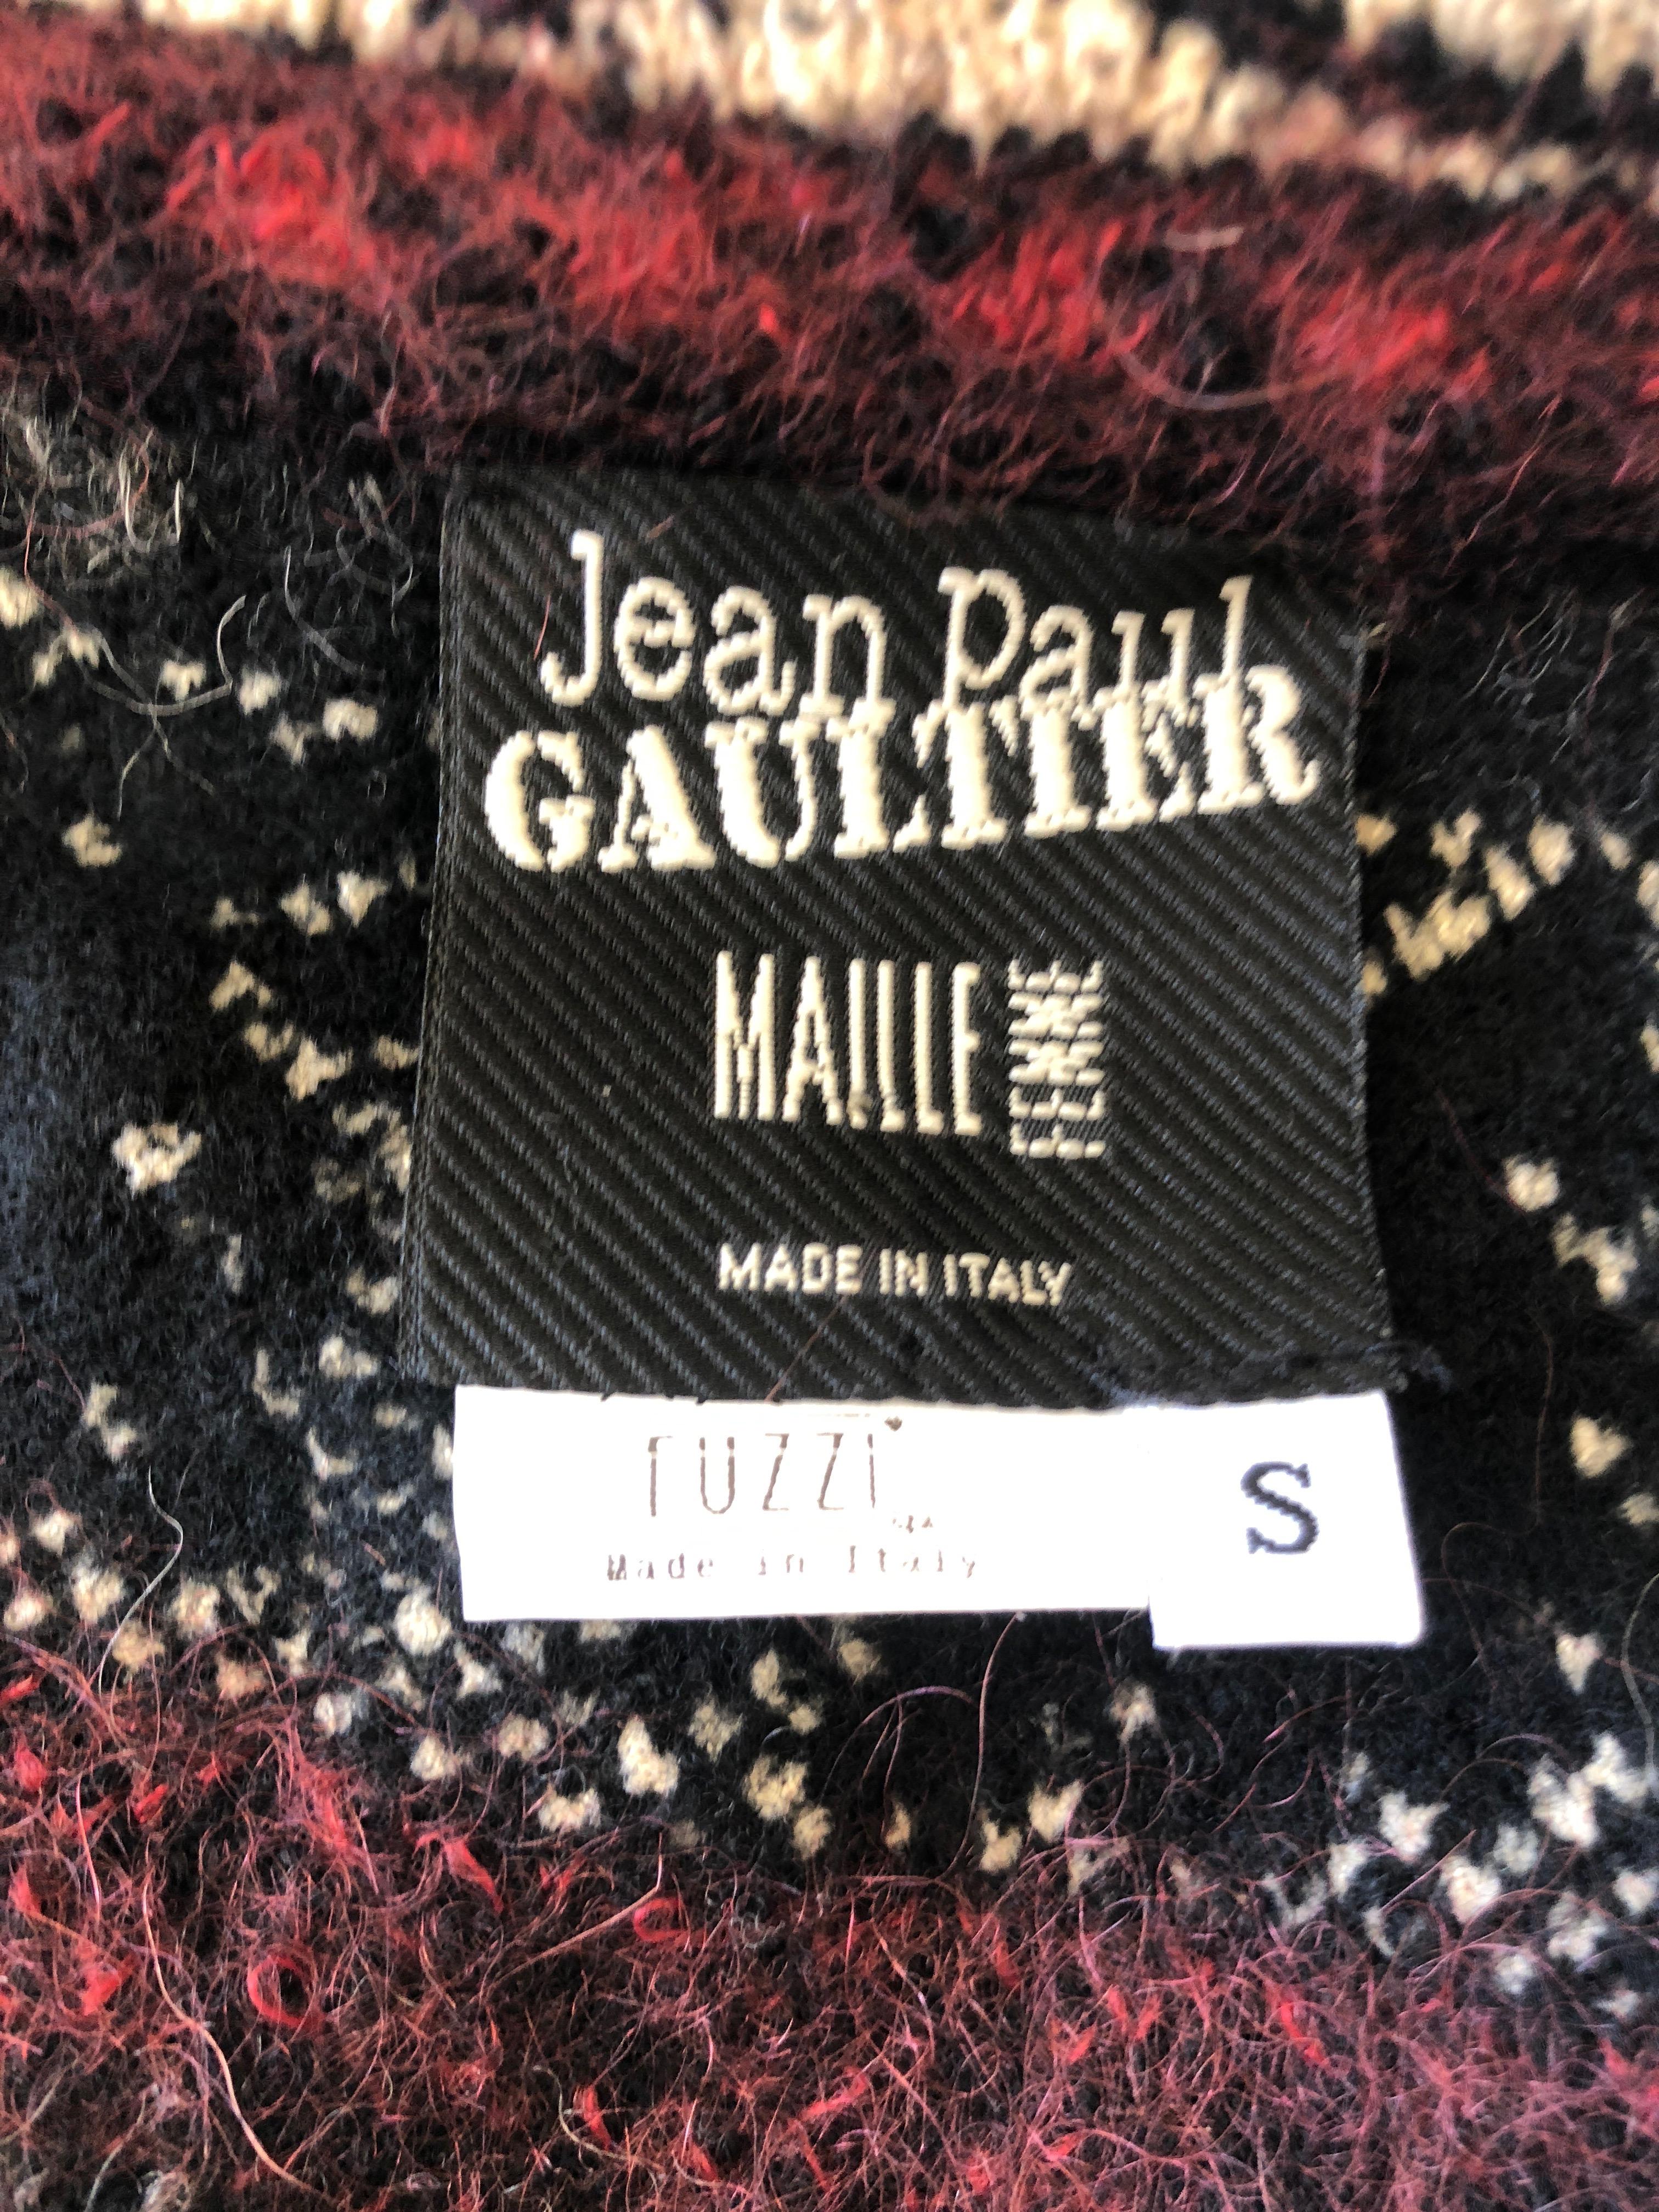 Jean Paul Gaultier Maille Femme Studded Boho Ethnic Vest with Curly Lamb Trim For Sale 2